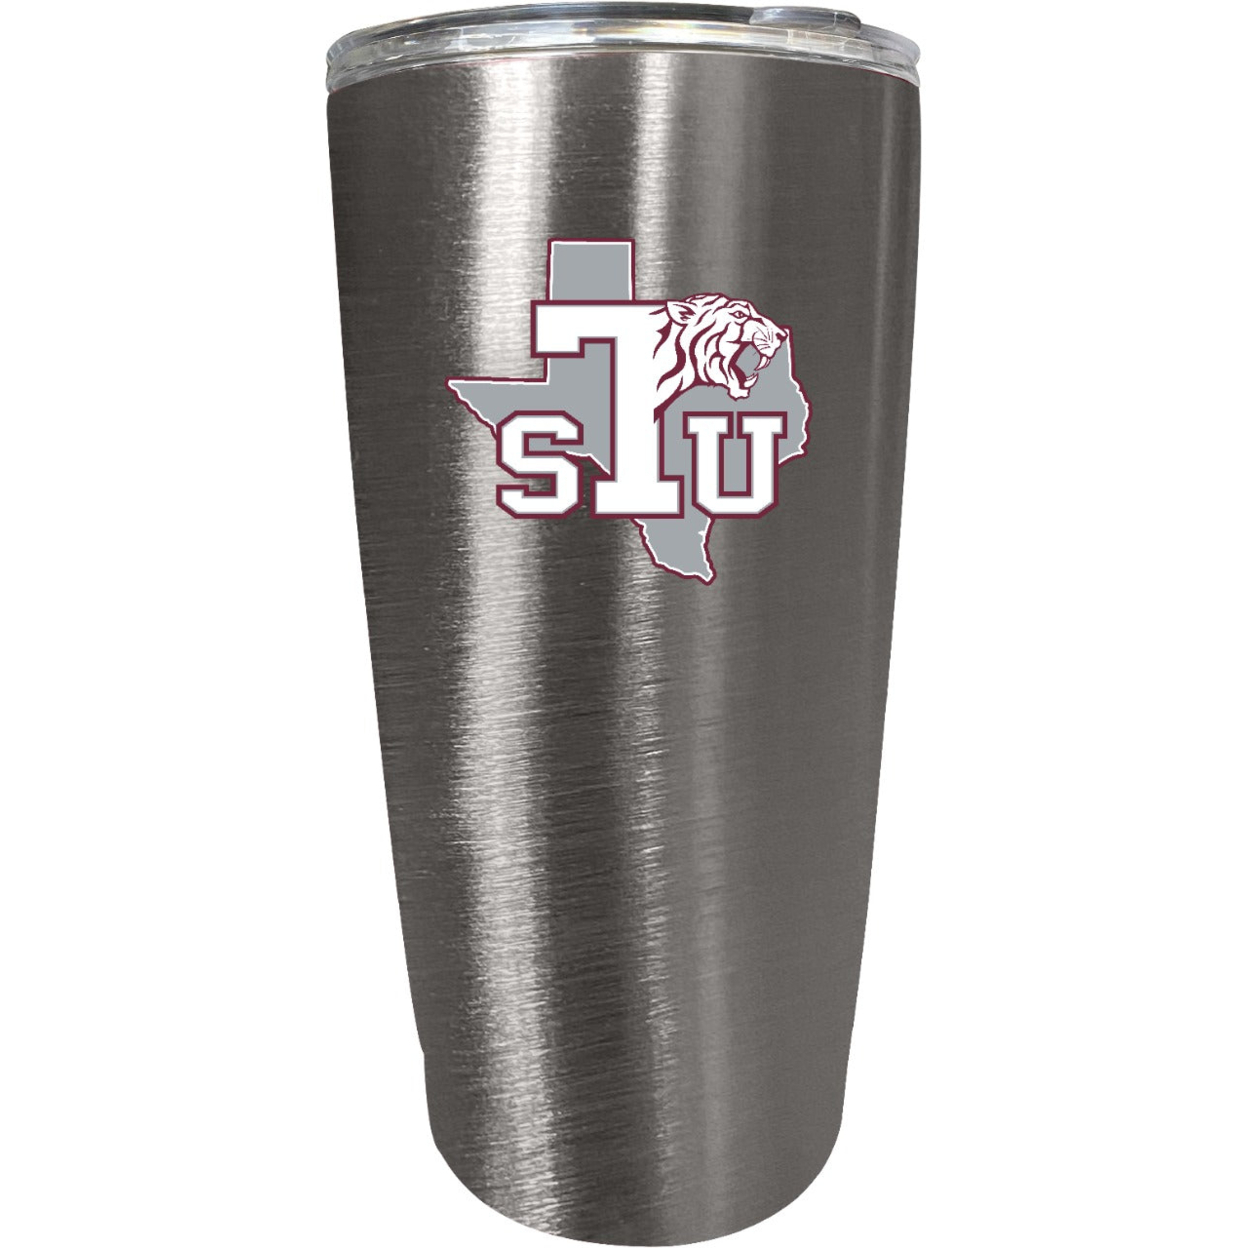 Texas Southern University 16 Oz Insulated Stainless Steel Tumbler Colorless